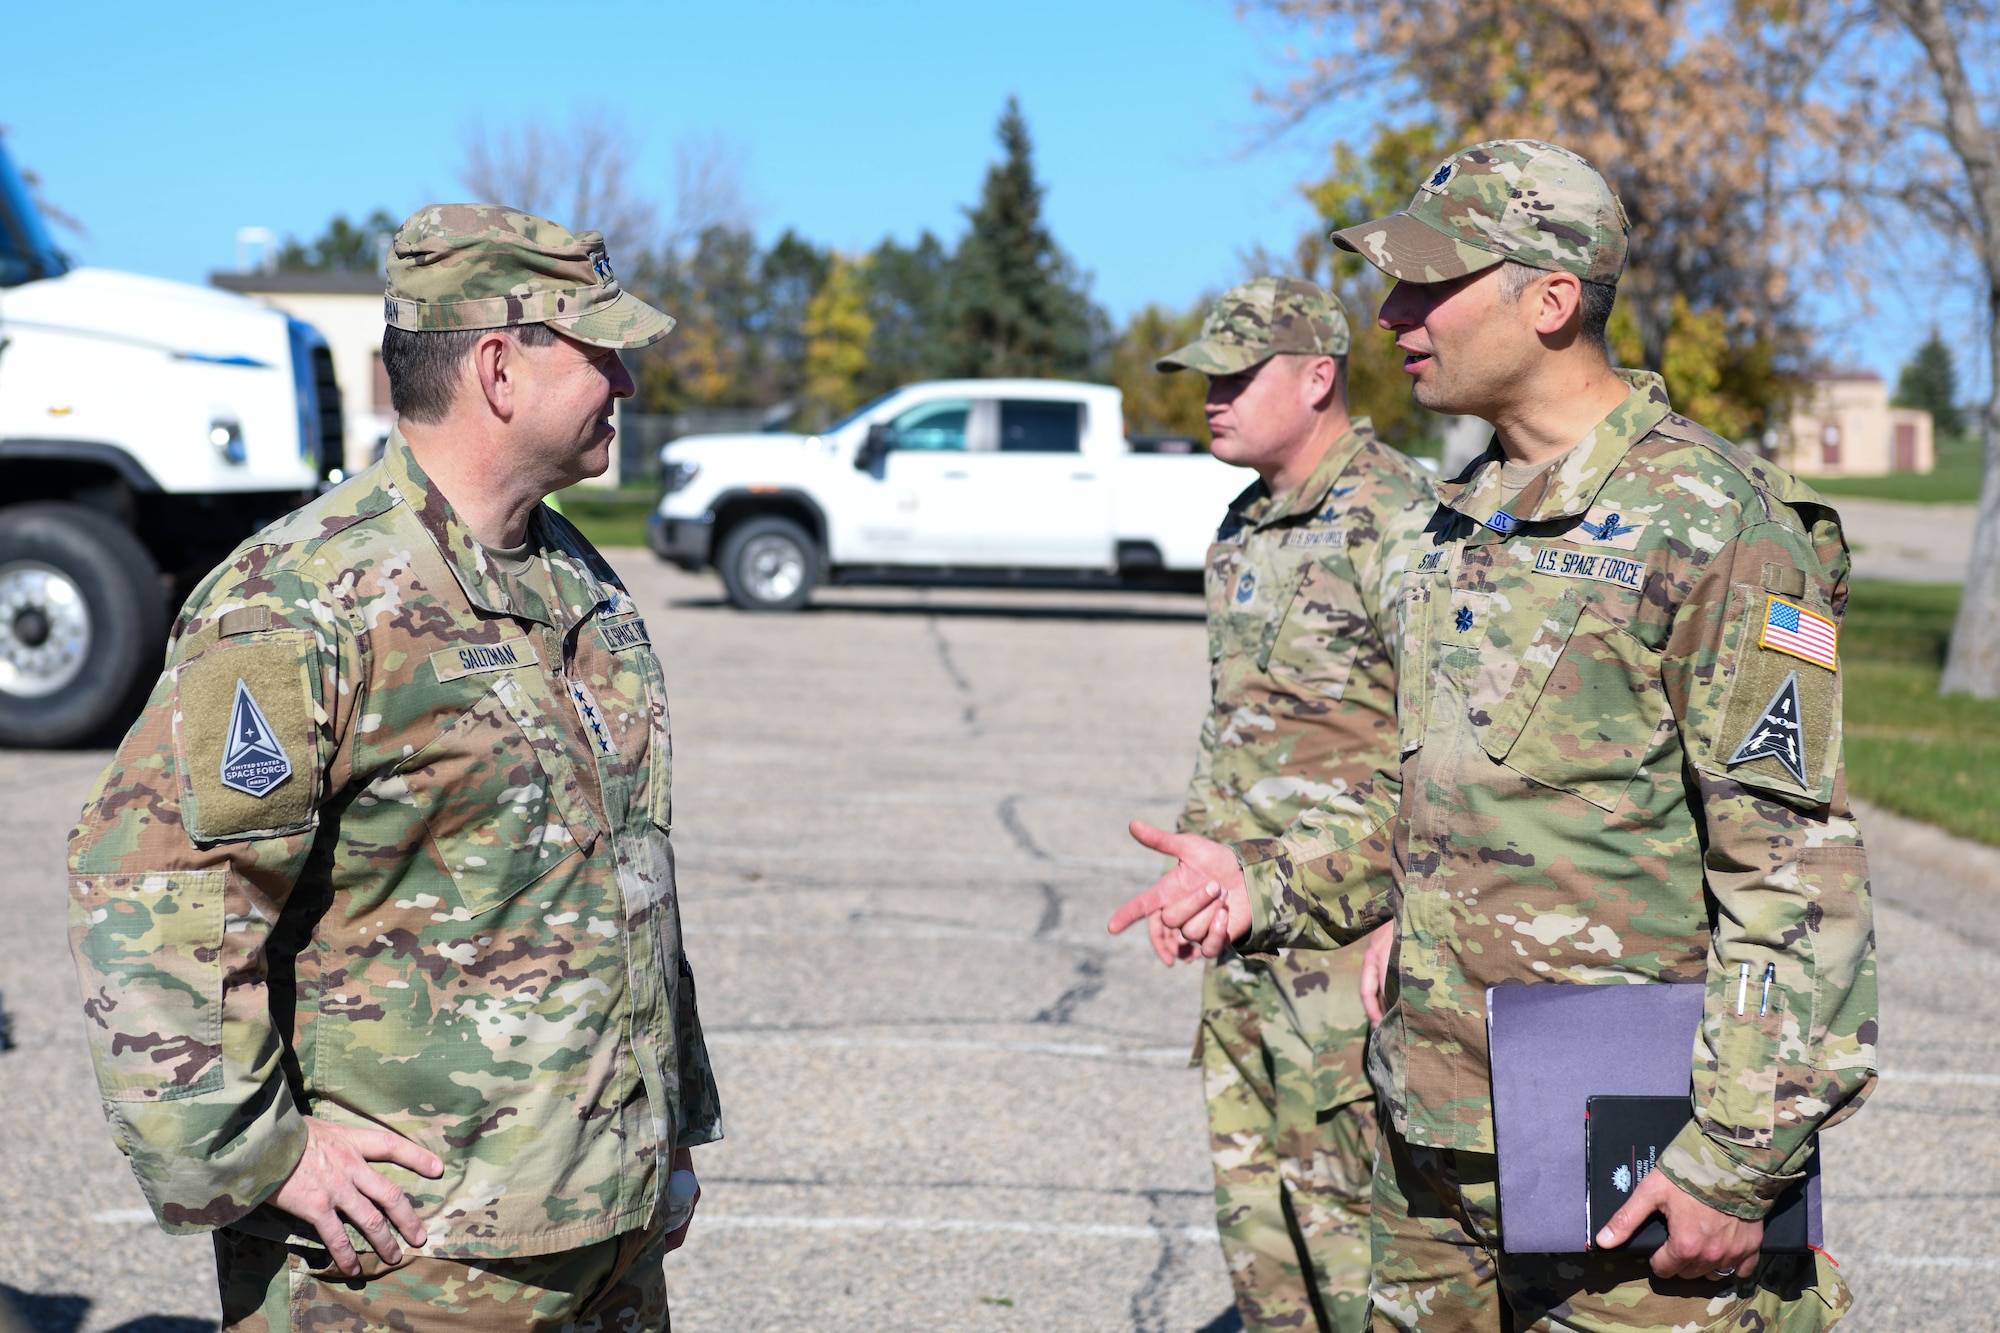 Two men in military uniforms talk while outside.